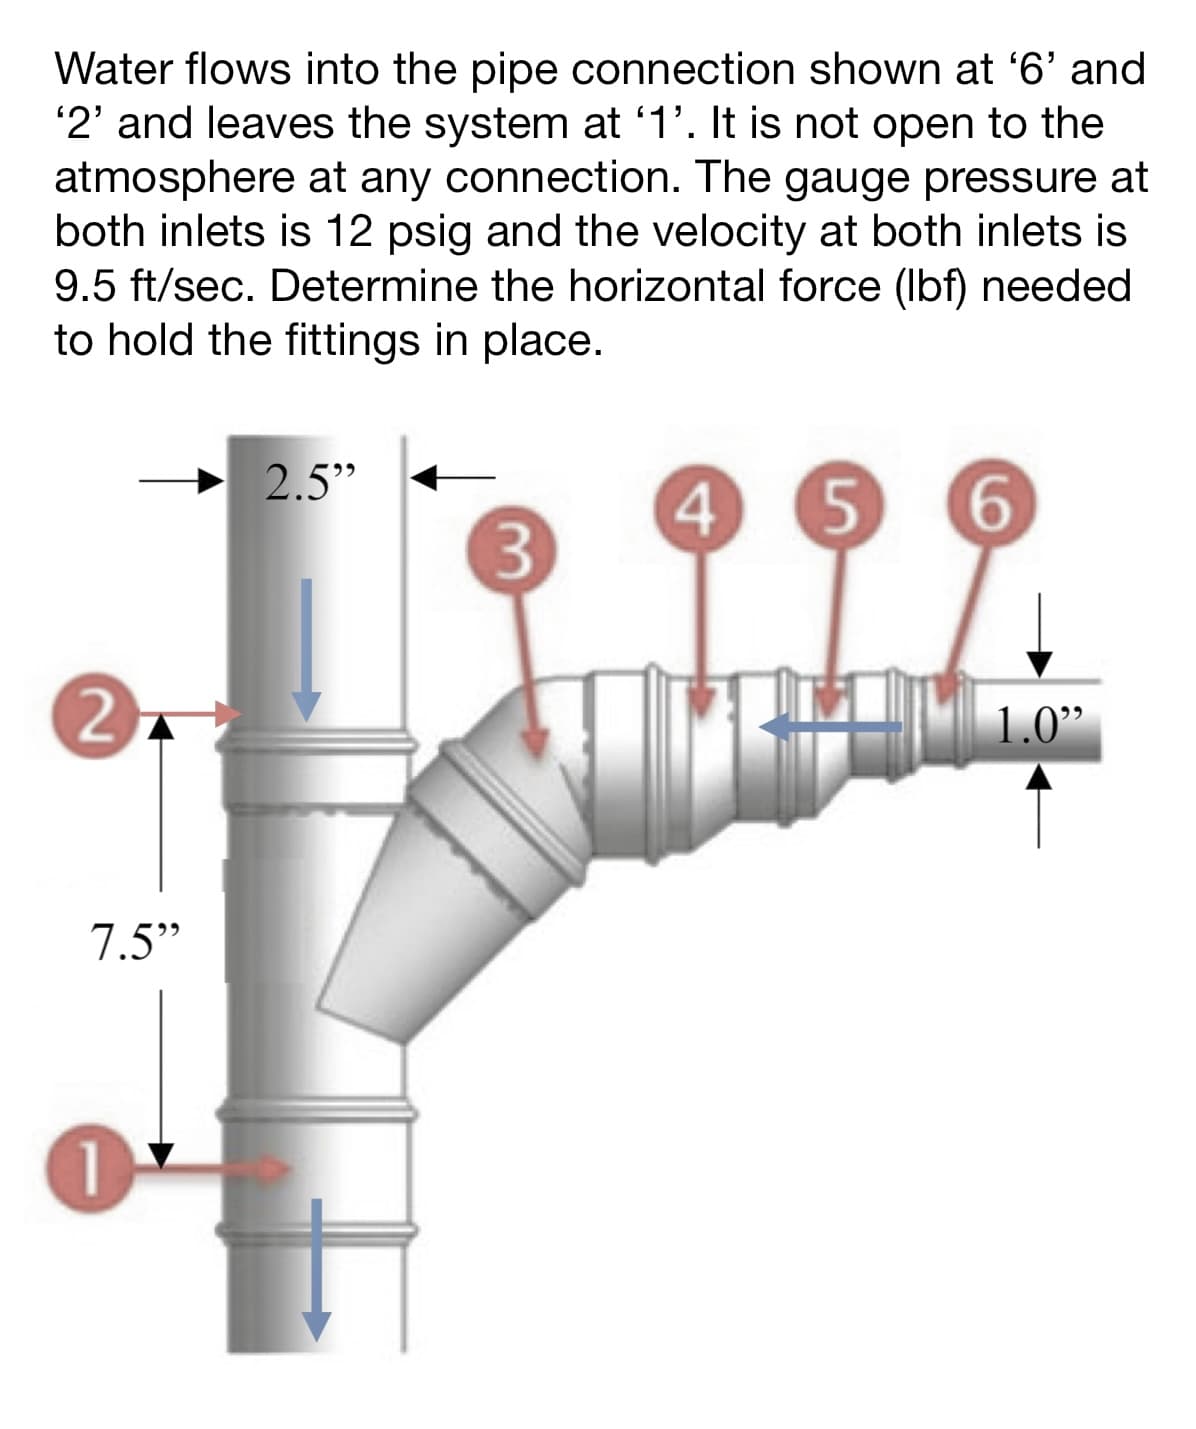 Water flows into the pipe connection shown at '6' and
'2' and leaves the system at '1'. It is not open to the
atmosphere at any connection. The gauge pressure at
both inlets is 12 psig and the velocity at both inlets is
9.5 ft/sec. Determine the horizontal force (lbf) needed
to hold the fittings in place.
2
7.5"
1
2.5"
3
4 5 6
1.0"